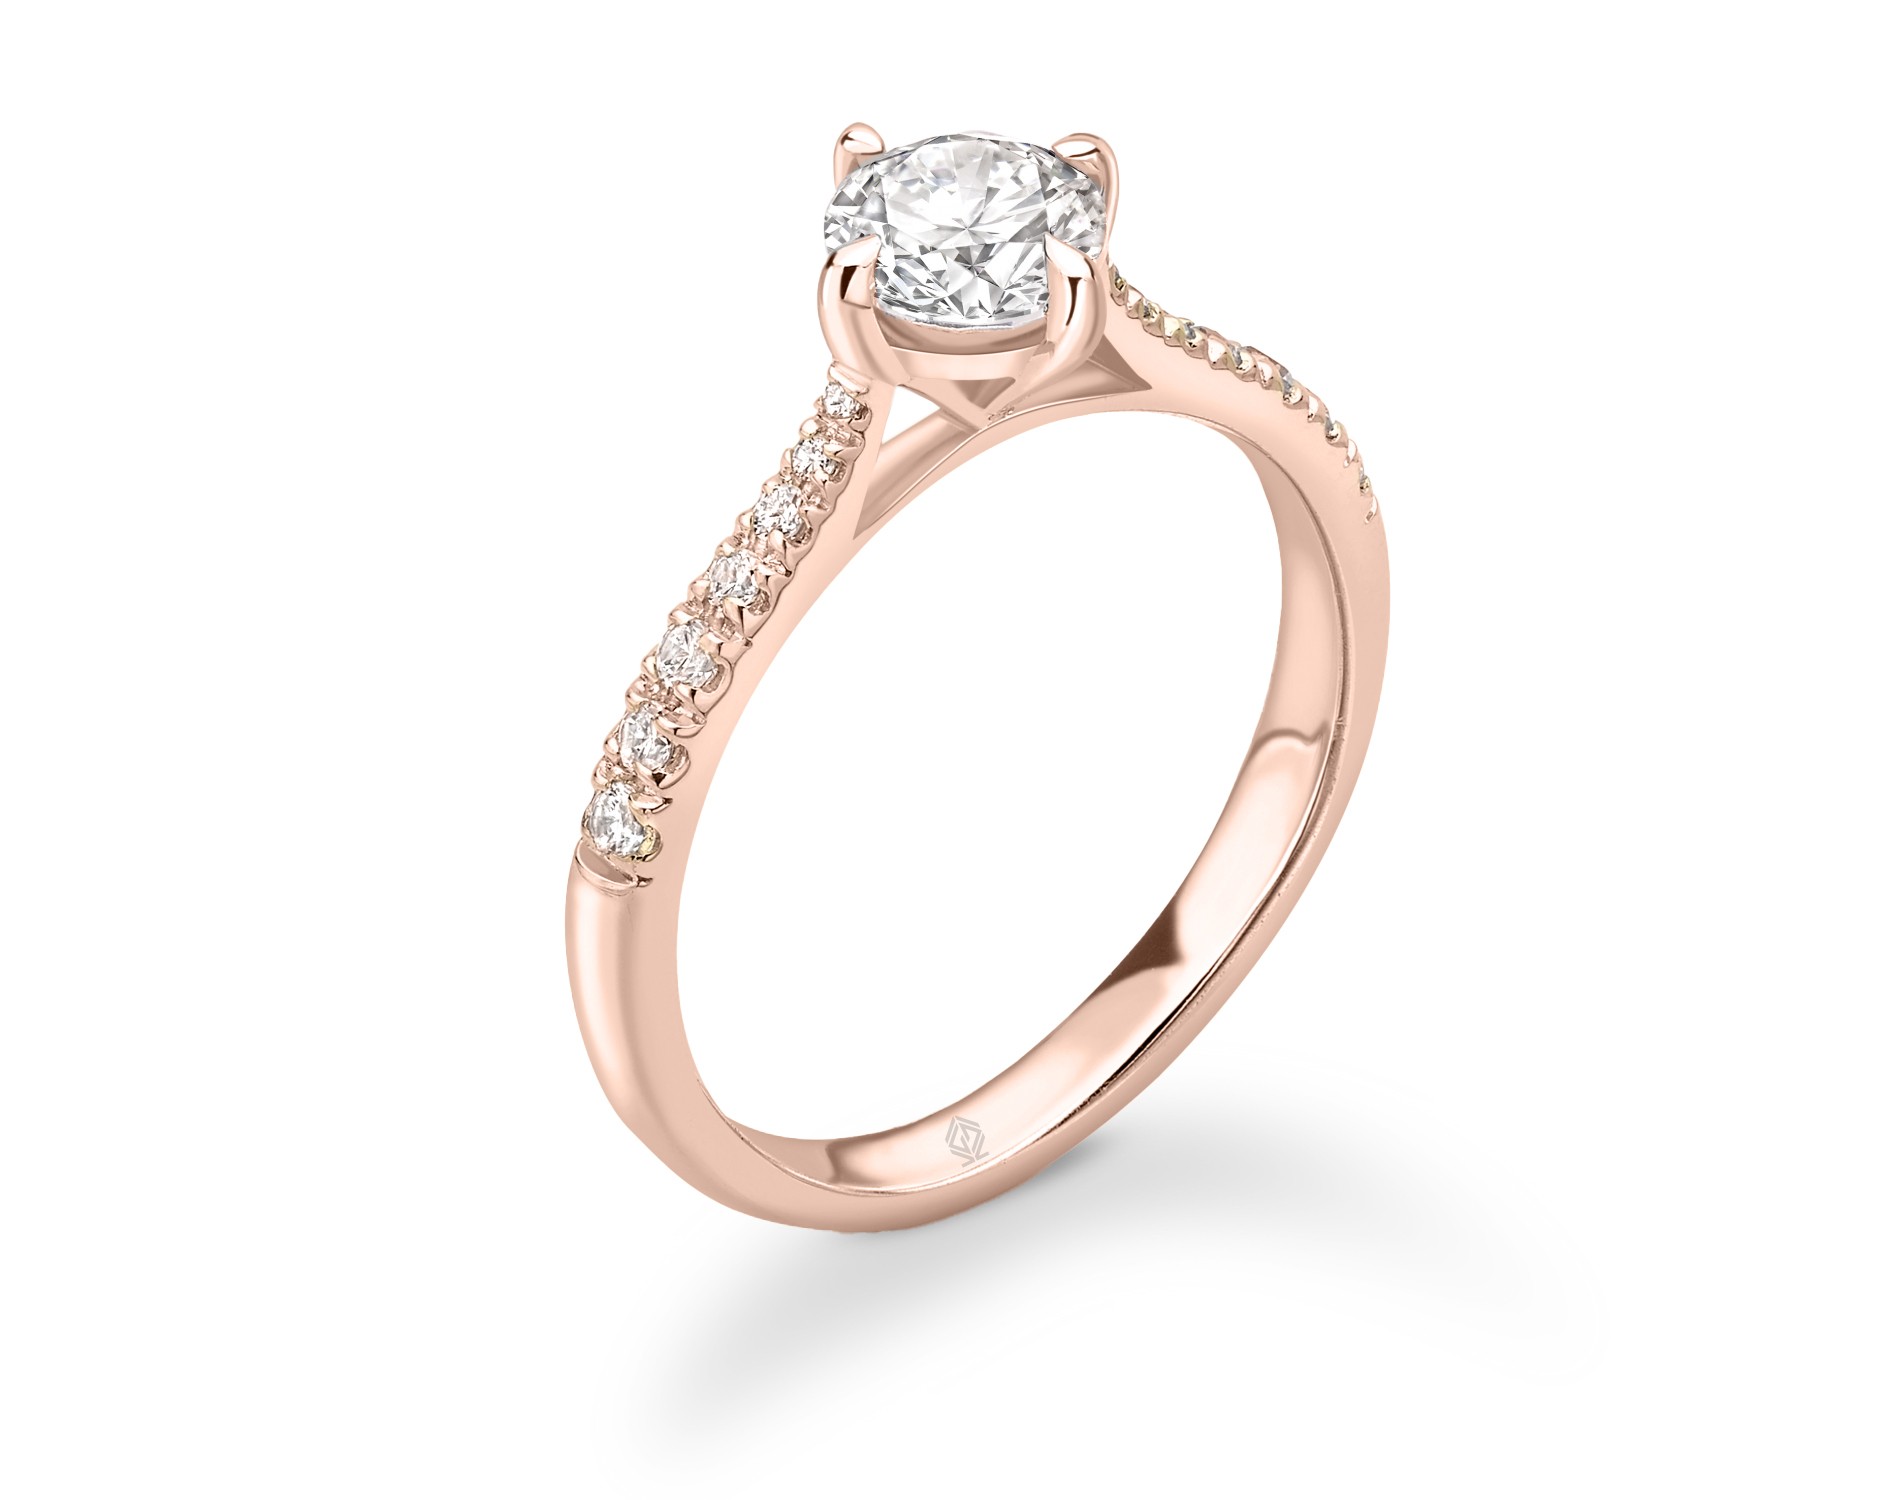 18K ROSE GOLD ROUND CUT 4 PRONGS DIAMOND ENGAGEMENT RING WITH SIDE STONES PAVE SET